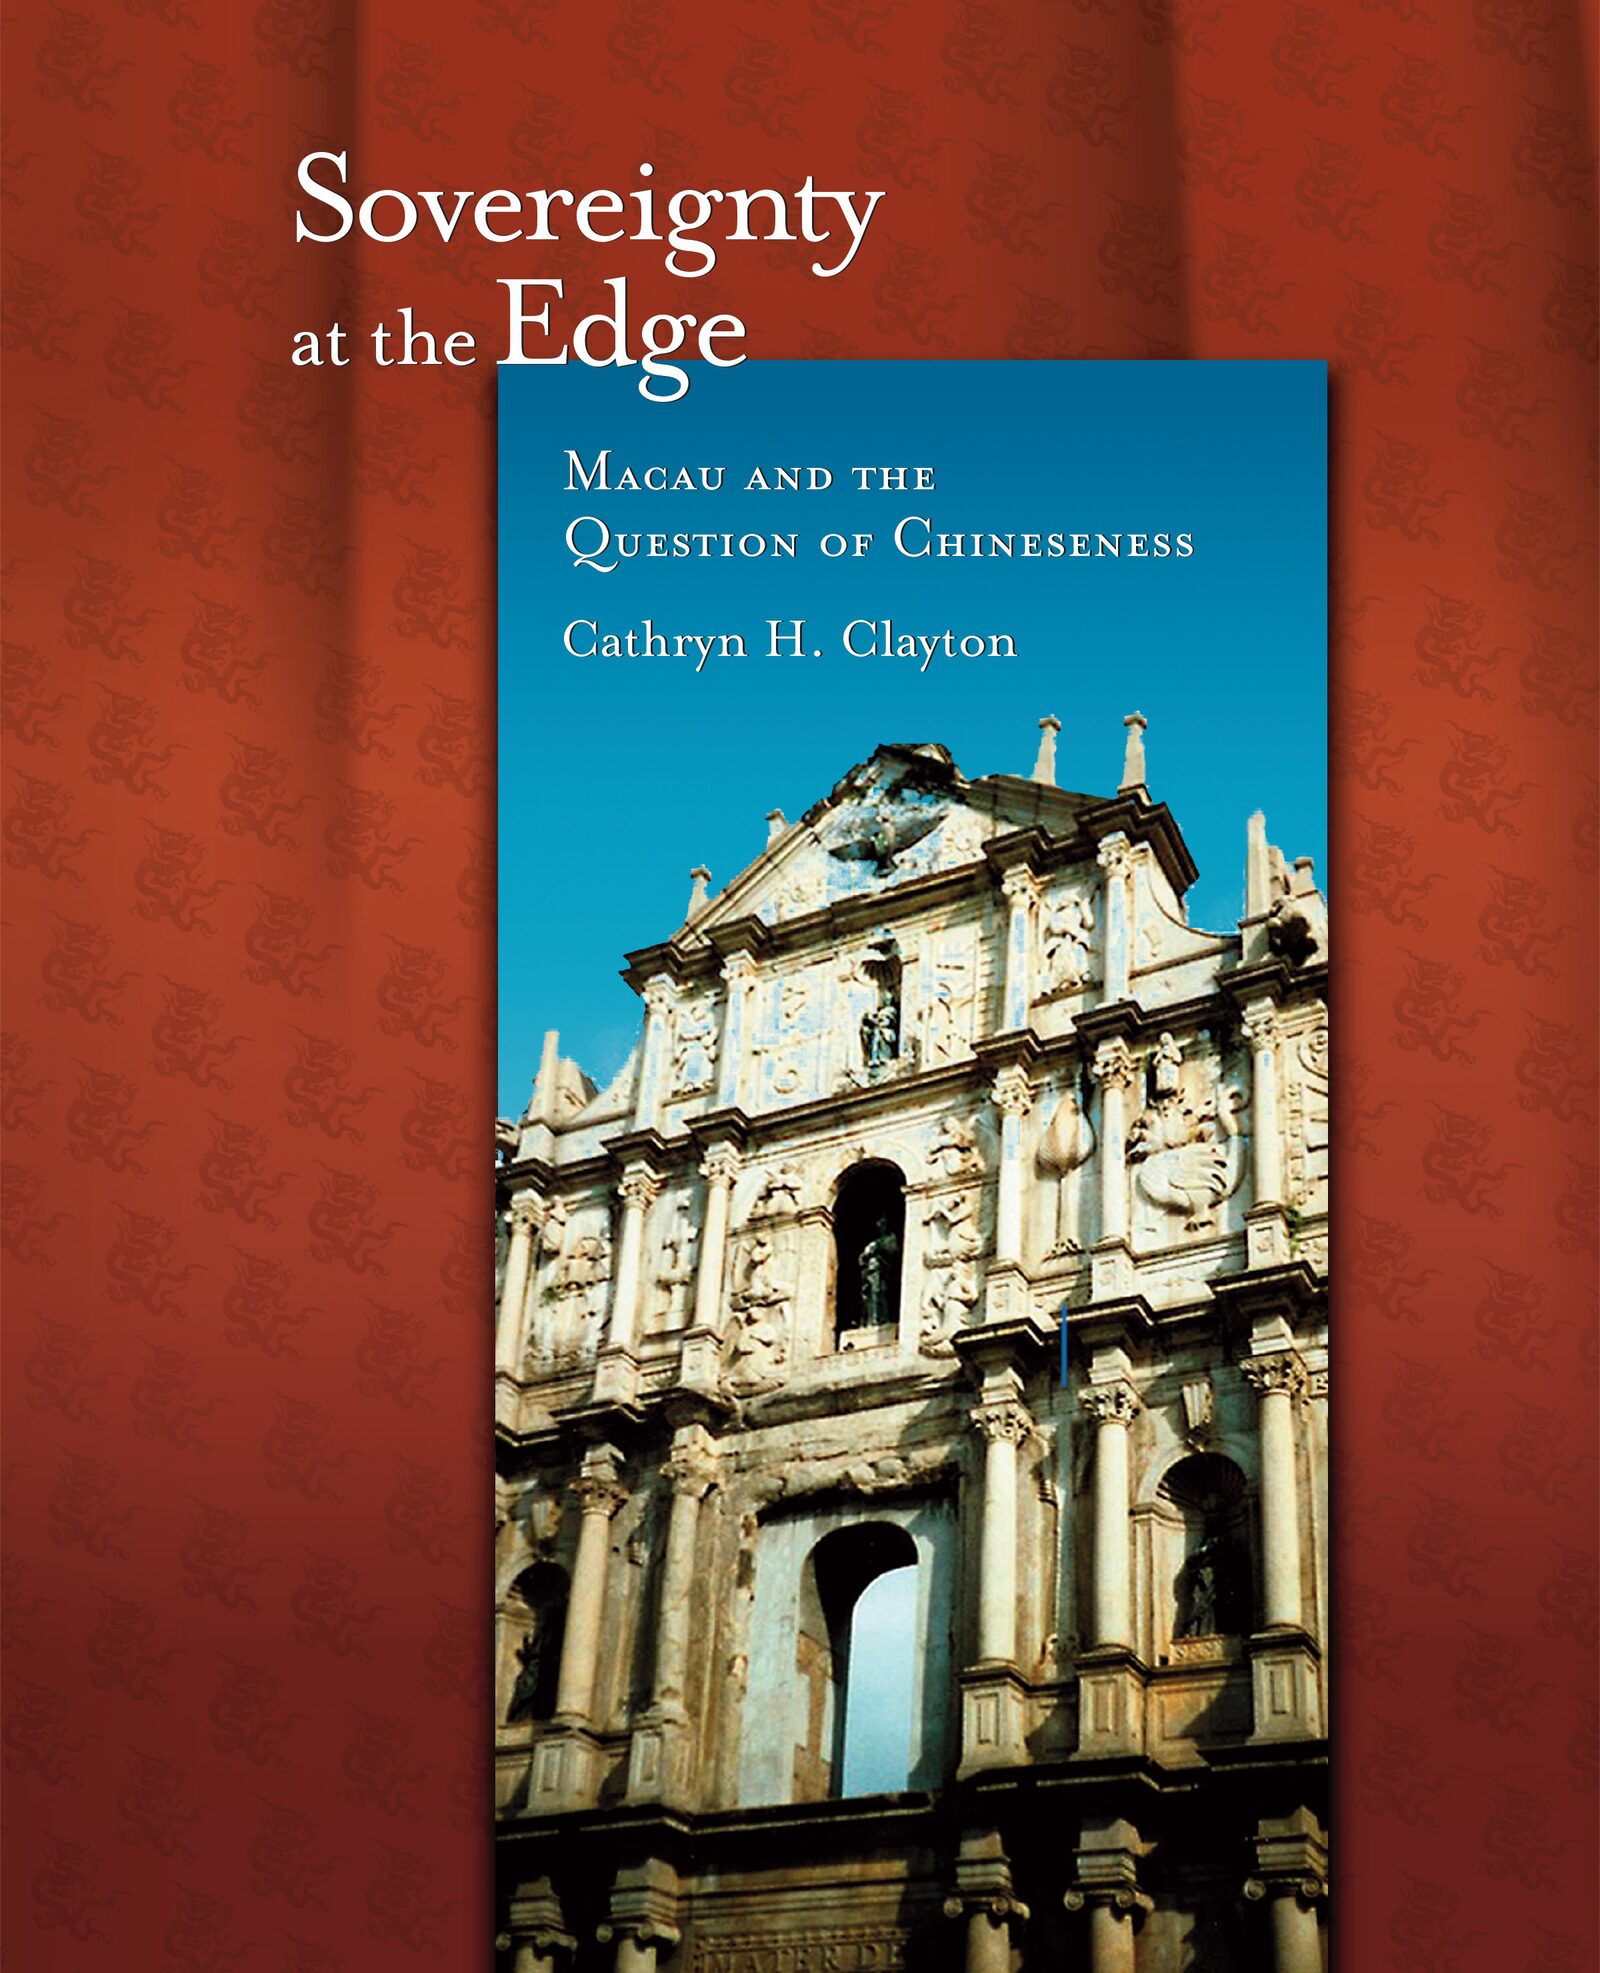 Book cover of "Sovereignty at the Edge"